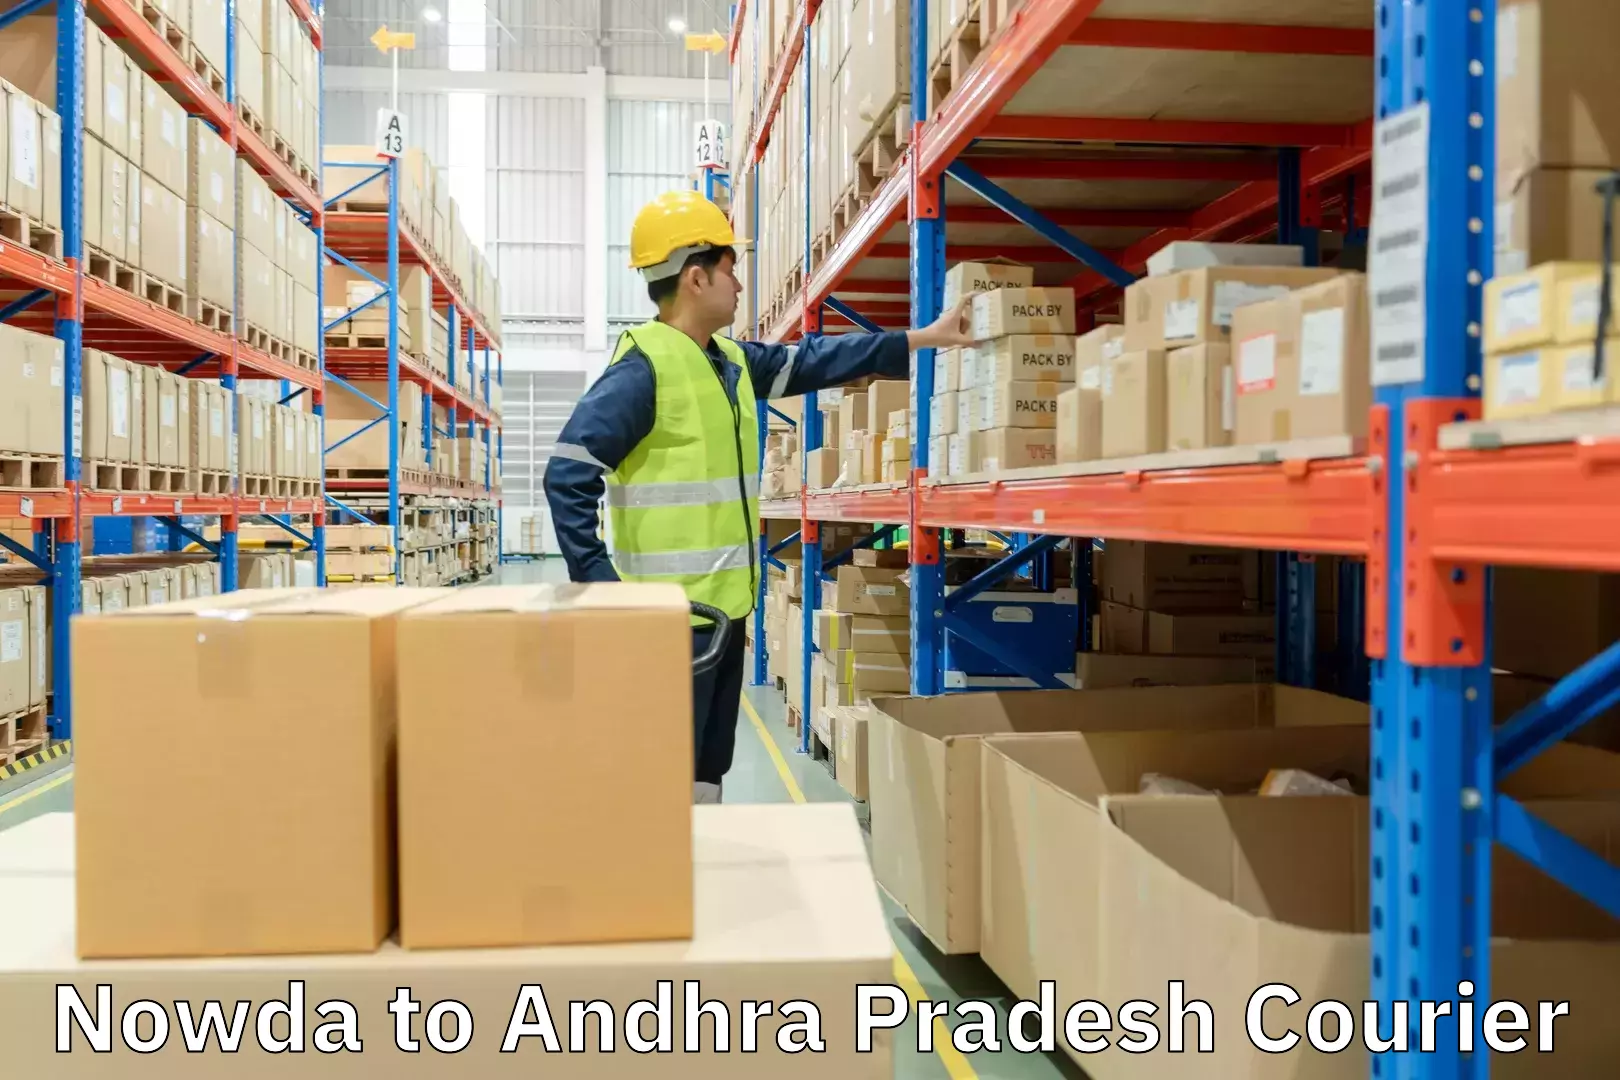 Cash on delivery service Nowda to Andhra Pradesh